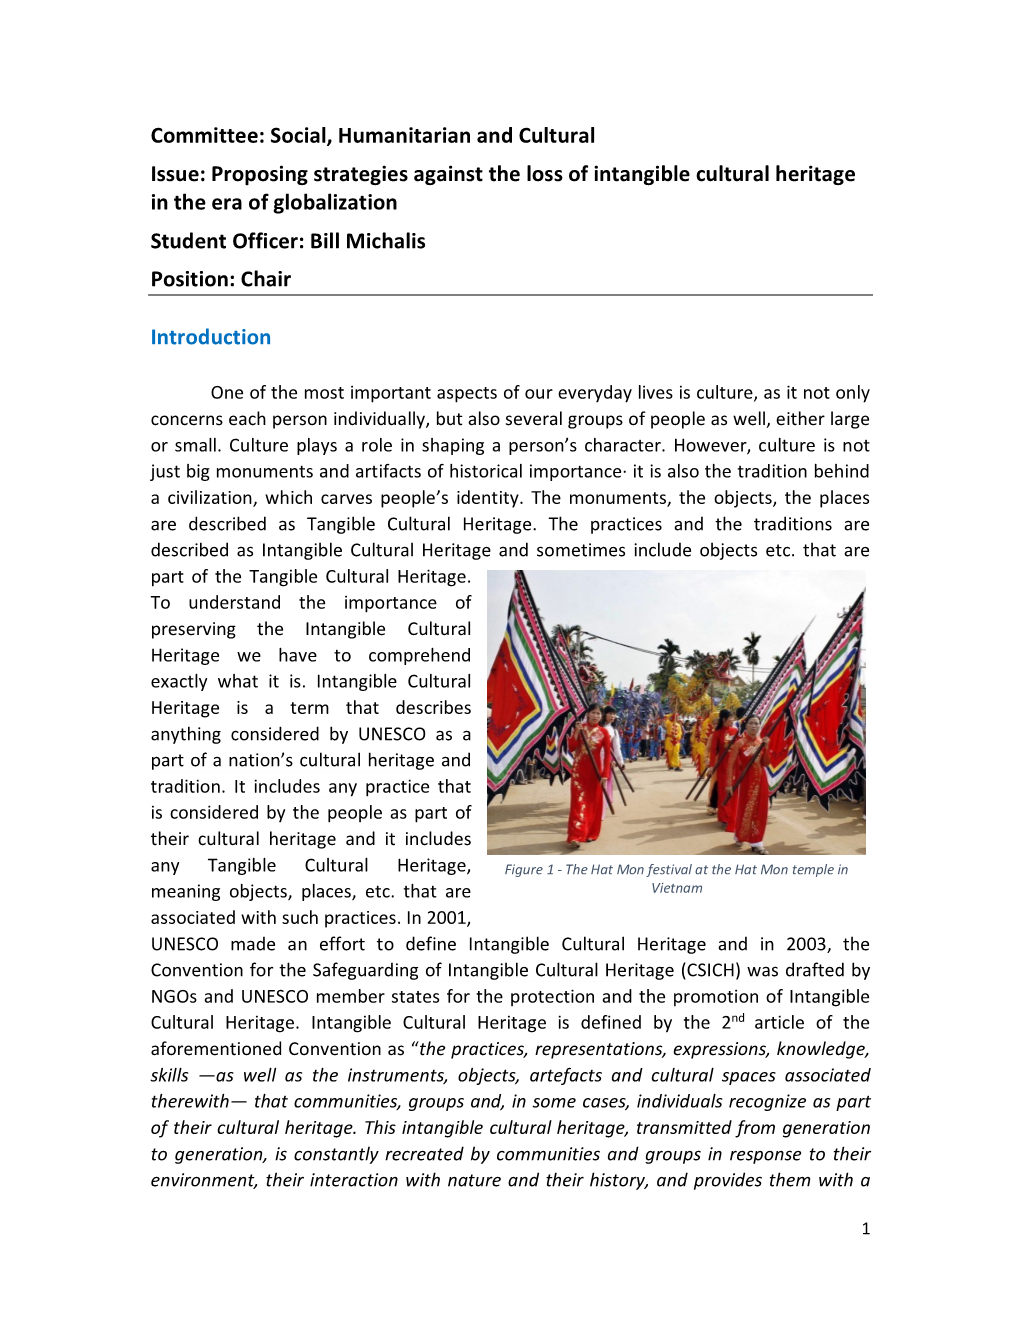 Proposing Strategies Against the Loss of Intangible Cultural Heritage in the Era of Globalization Student Officer: Bill Michalis Position: Chair